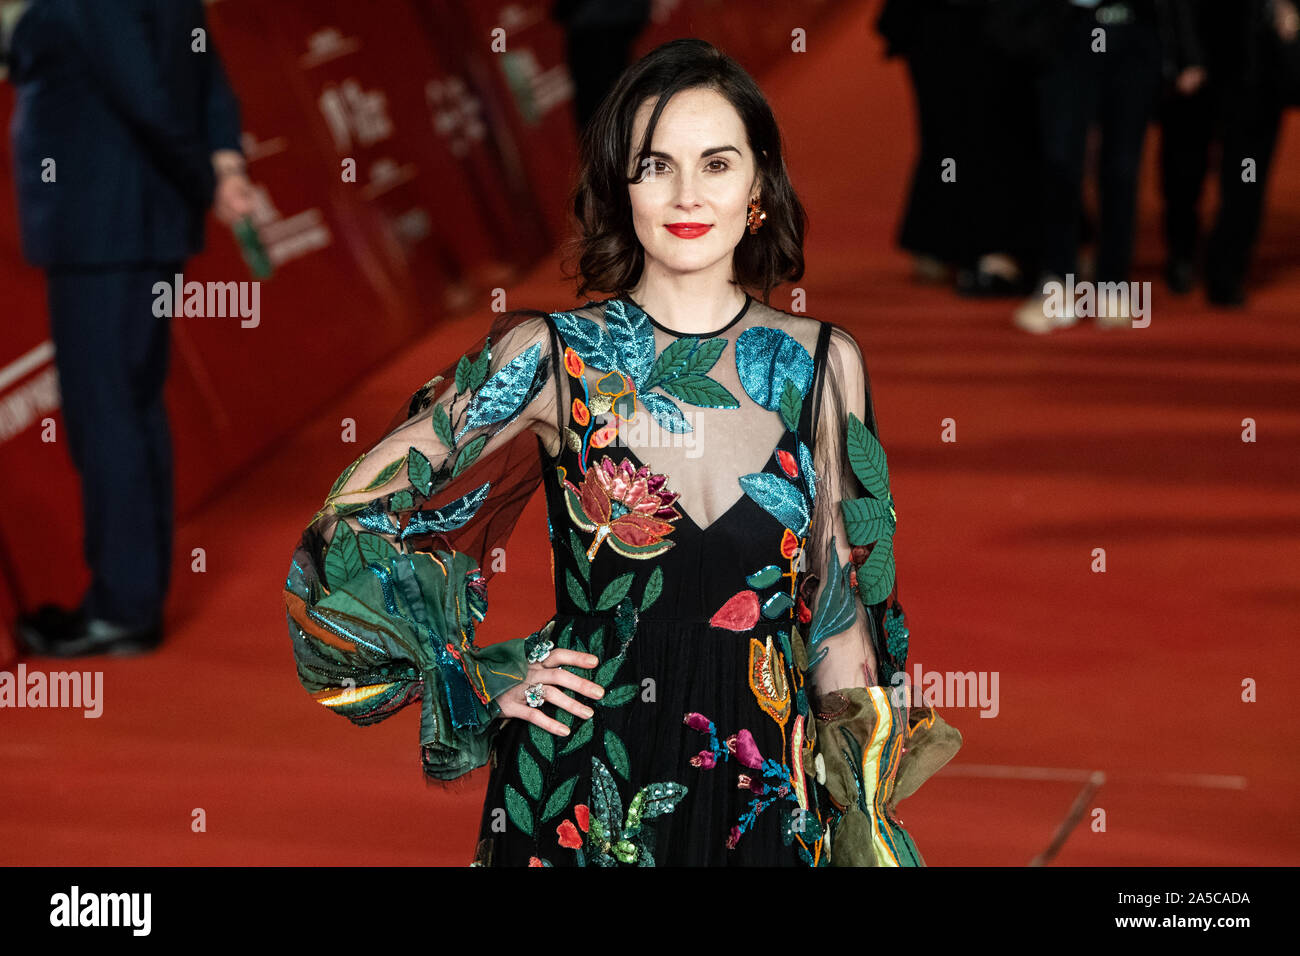 Michelle Dockery attends the 'Downton Abbey' red carpet during the 14th Rome Film Festival. Stock Photo